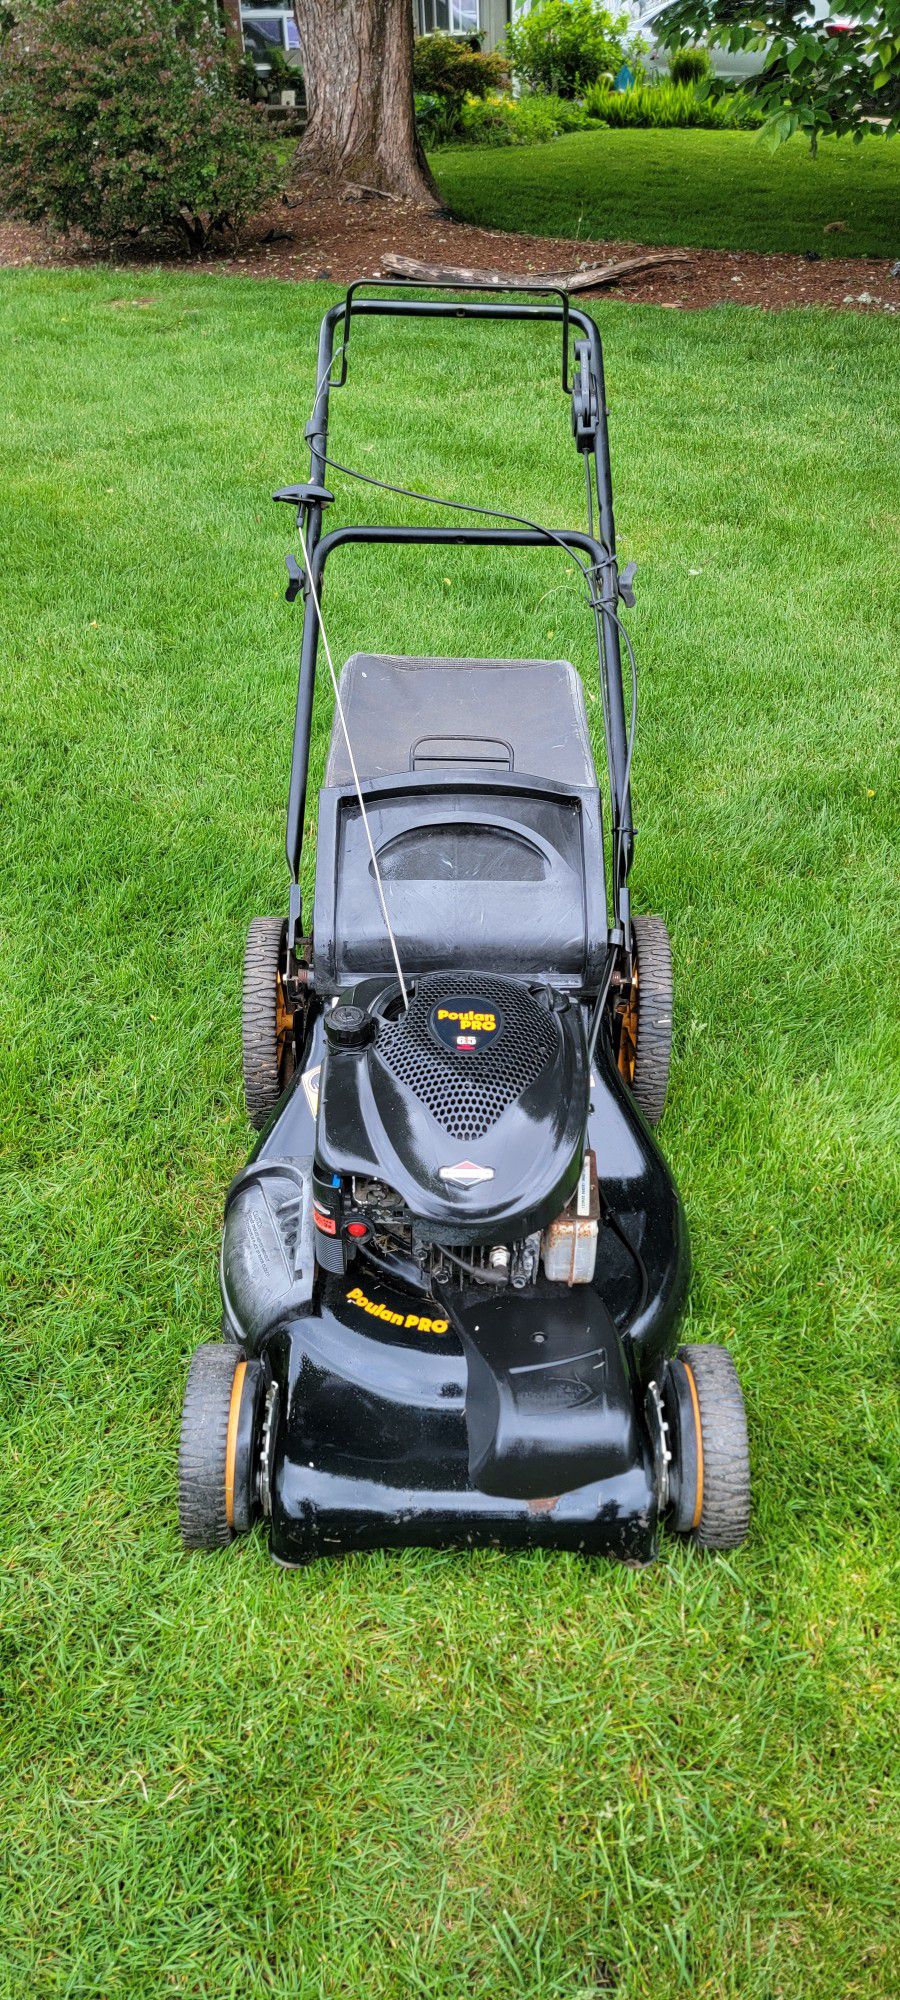 Self Propelled Poulan Lawn Mower With Bag Runs Great 